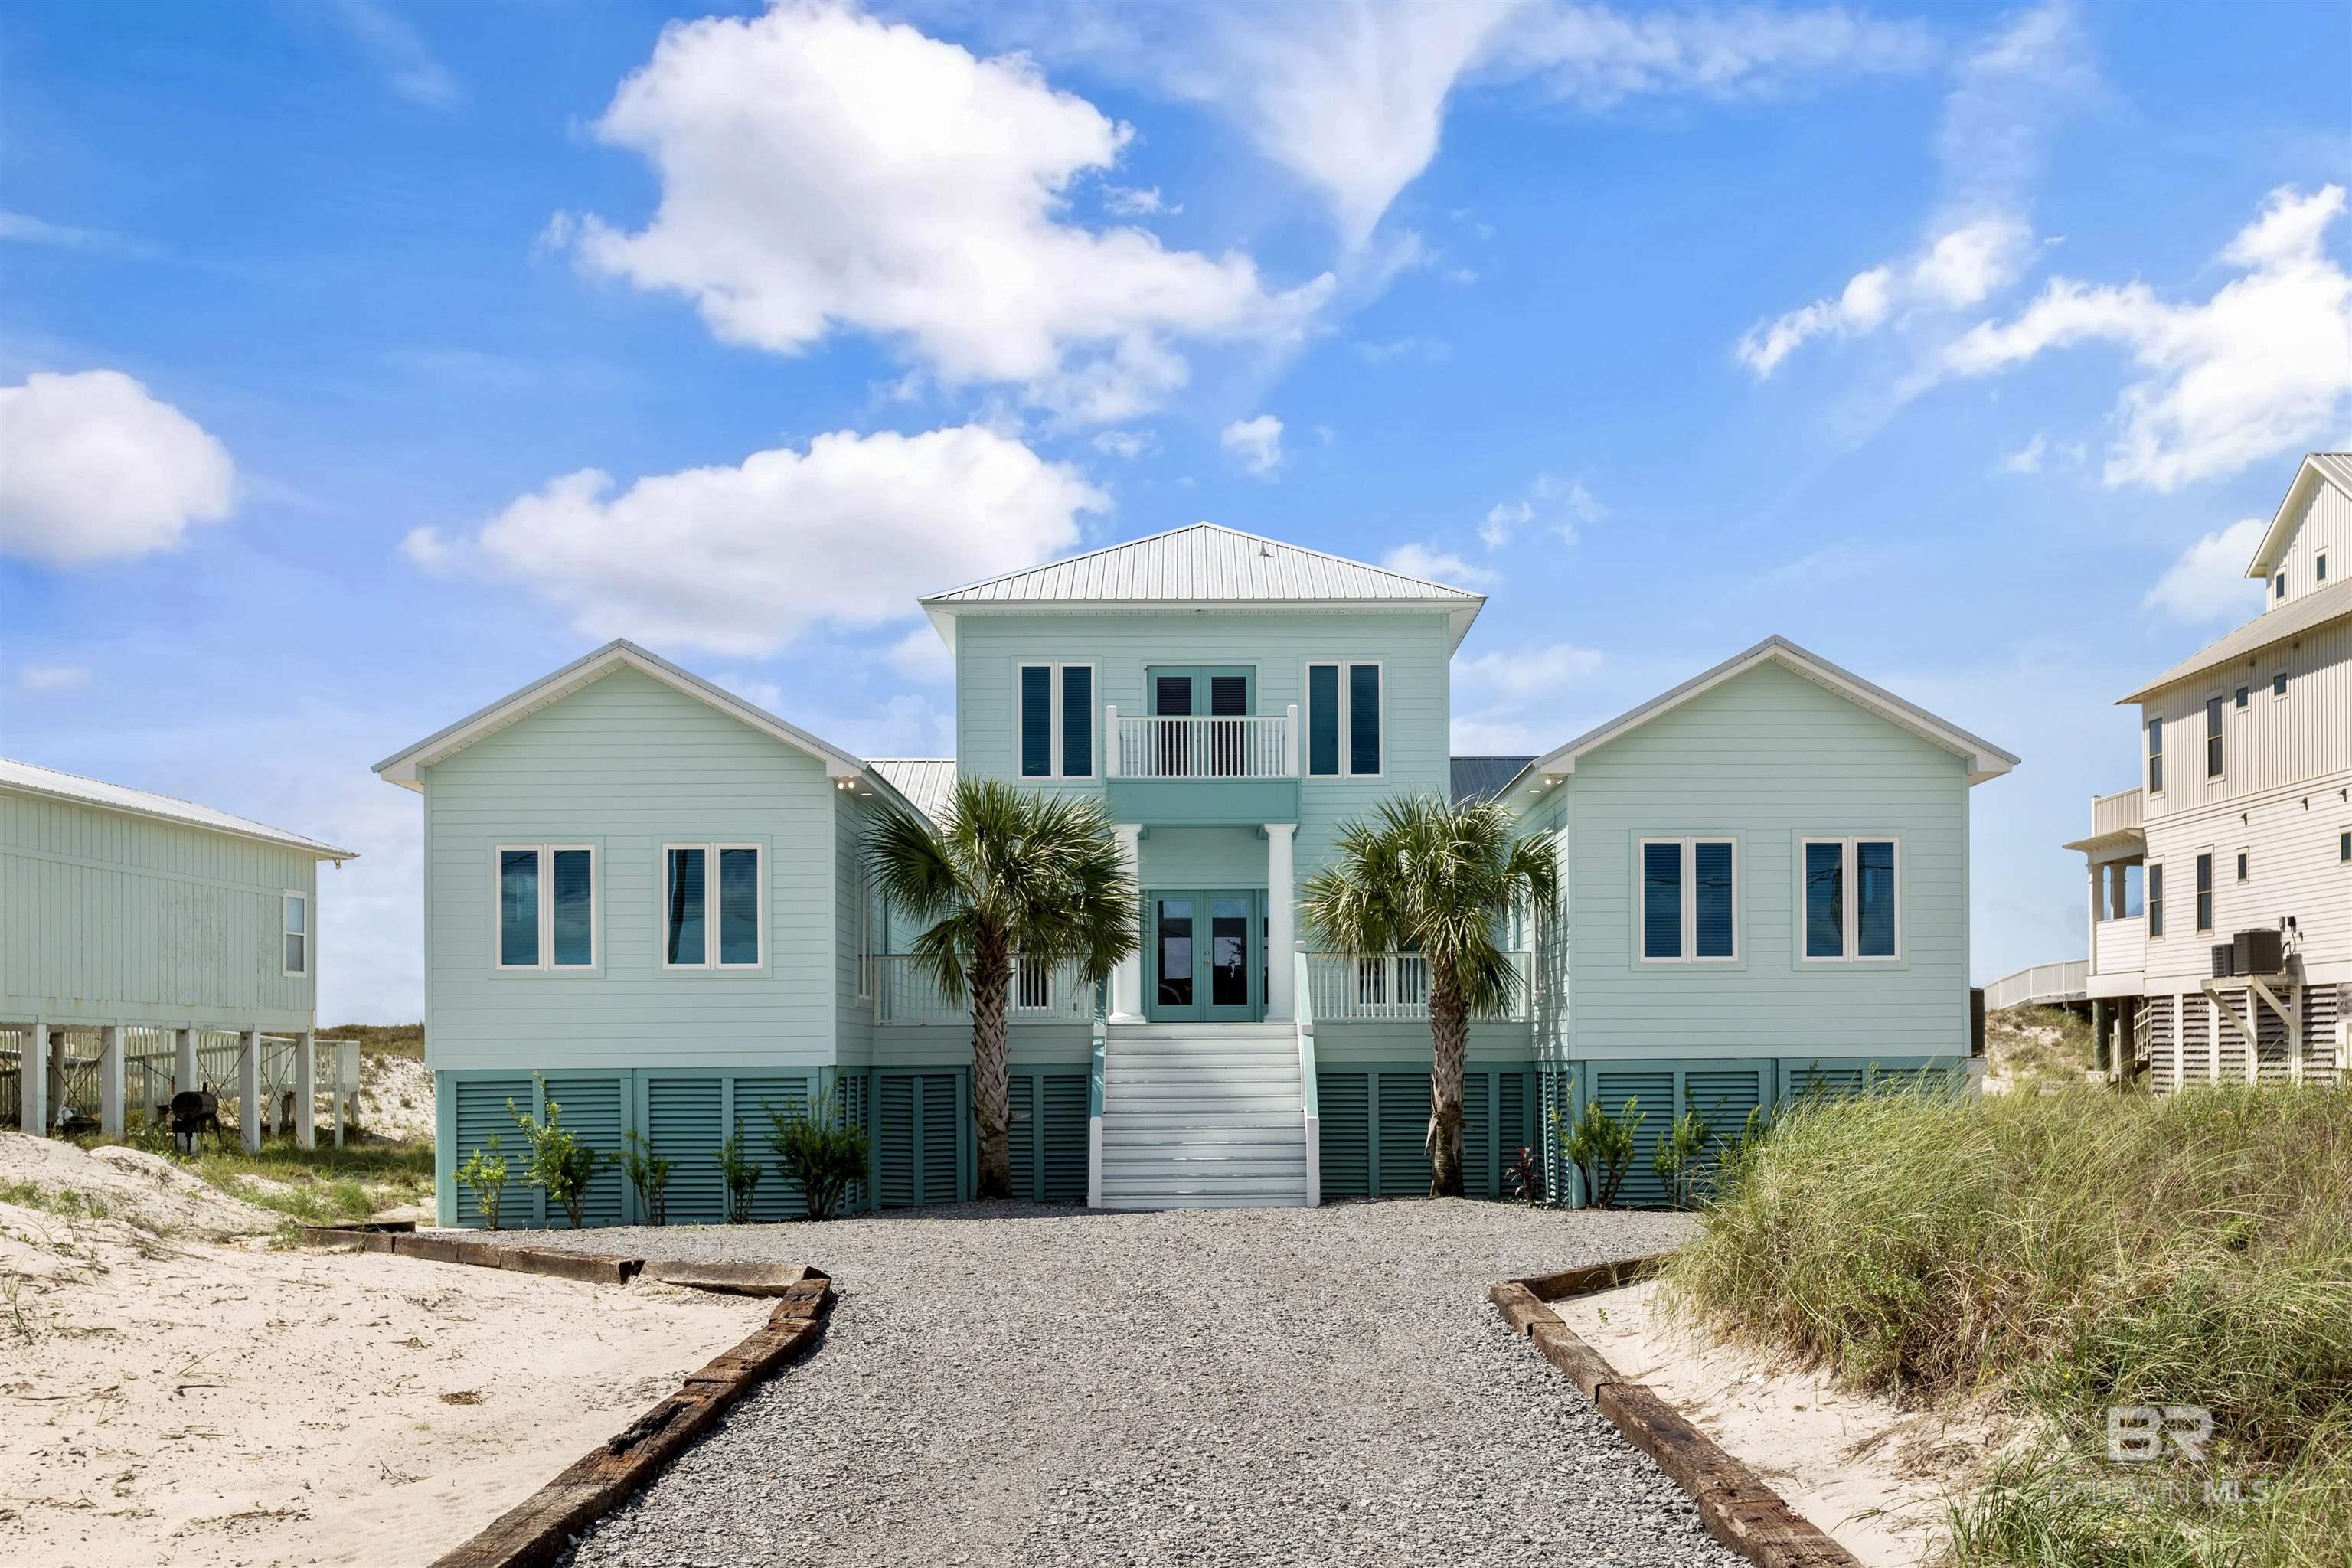 Gorgeous Gulf Front Home with new Upgrades and Renovations just completed!   This is an a large Income producer with projection of $140,000.00 yearly average.  CHECK OUT THE VIDEO TOUR TO SEE THE HOME!  This beautiful home has direct beach views of the Gulf of Mexico all across the back and lagoon views from the front.   The home sits on a large 100'x400' lot with 100' on the Gulf.  This home has been significantly renovated, rebuilt and professionally decorated with attention to every detail.   There is a new metal roof, new flooring, new kitchen counters, new gorgeous lighting, new appliances and new interior and exterior painting.   Your primary bedroom is large with a sitting area going out onto the porch overlooking the Beach, you have a very luxurious bathroom with an extra large step-in shower, glass surround and new beautiful countertops with unique LED lights above the double vanity.   The large back porch overlooks the Gulf of Mexico and is perfect for entertaining.  There is a also a side screened porch for relaxing having your coffee in the mornings and smaller gatherings.   There is also a large area of storage under the house.  Nice size sand dunes that help protect your home   The driveway has just been rebuilt to finish the exterior look.  This home is sold completely Furnished with all the furniture, furnishings, accessories and is rent ready to produce large rental income for an income investment or second home.